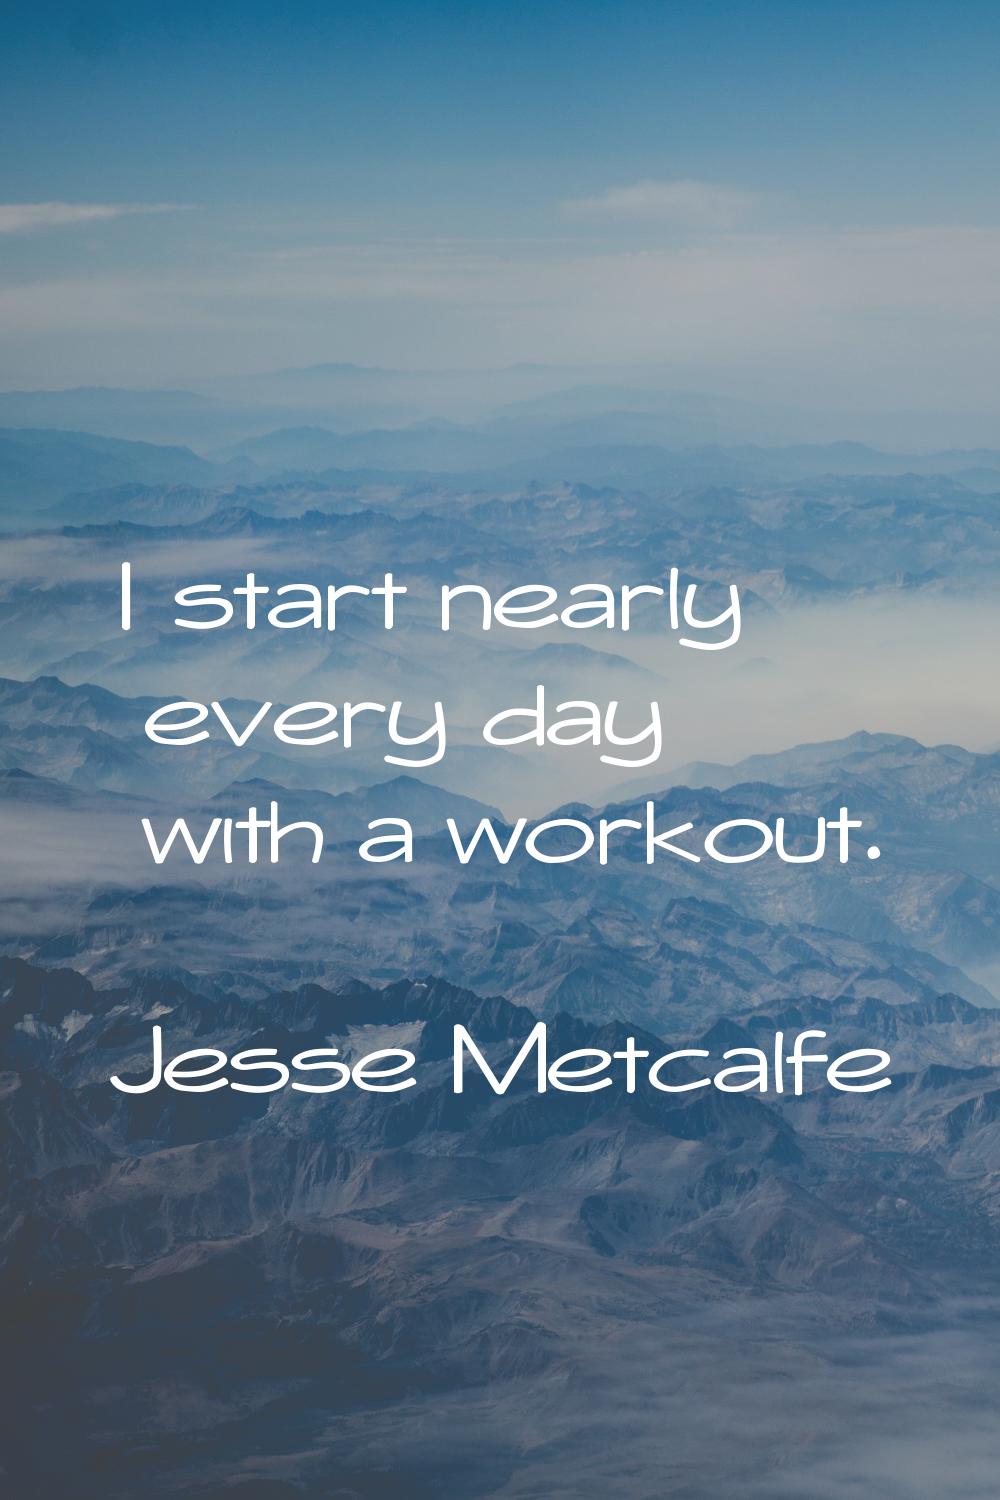 I start nearly every day with a workout.